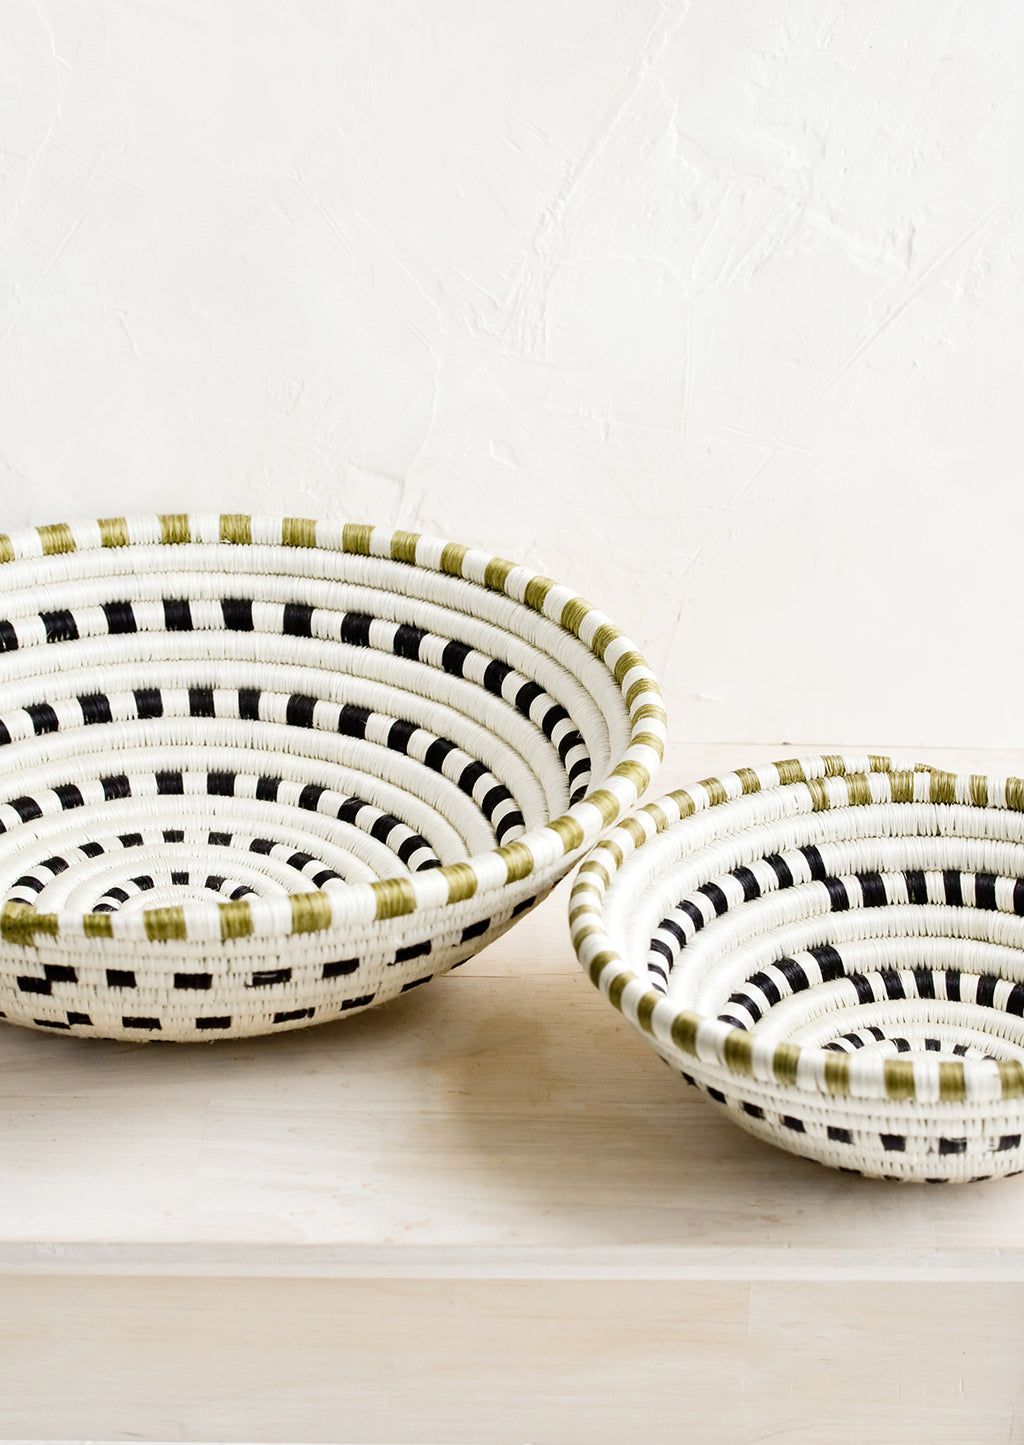 1: Two sweetgrass baskets in small and large sizes.